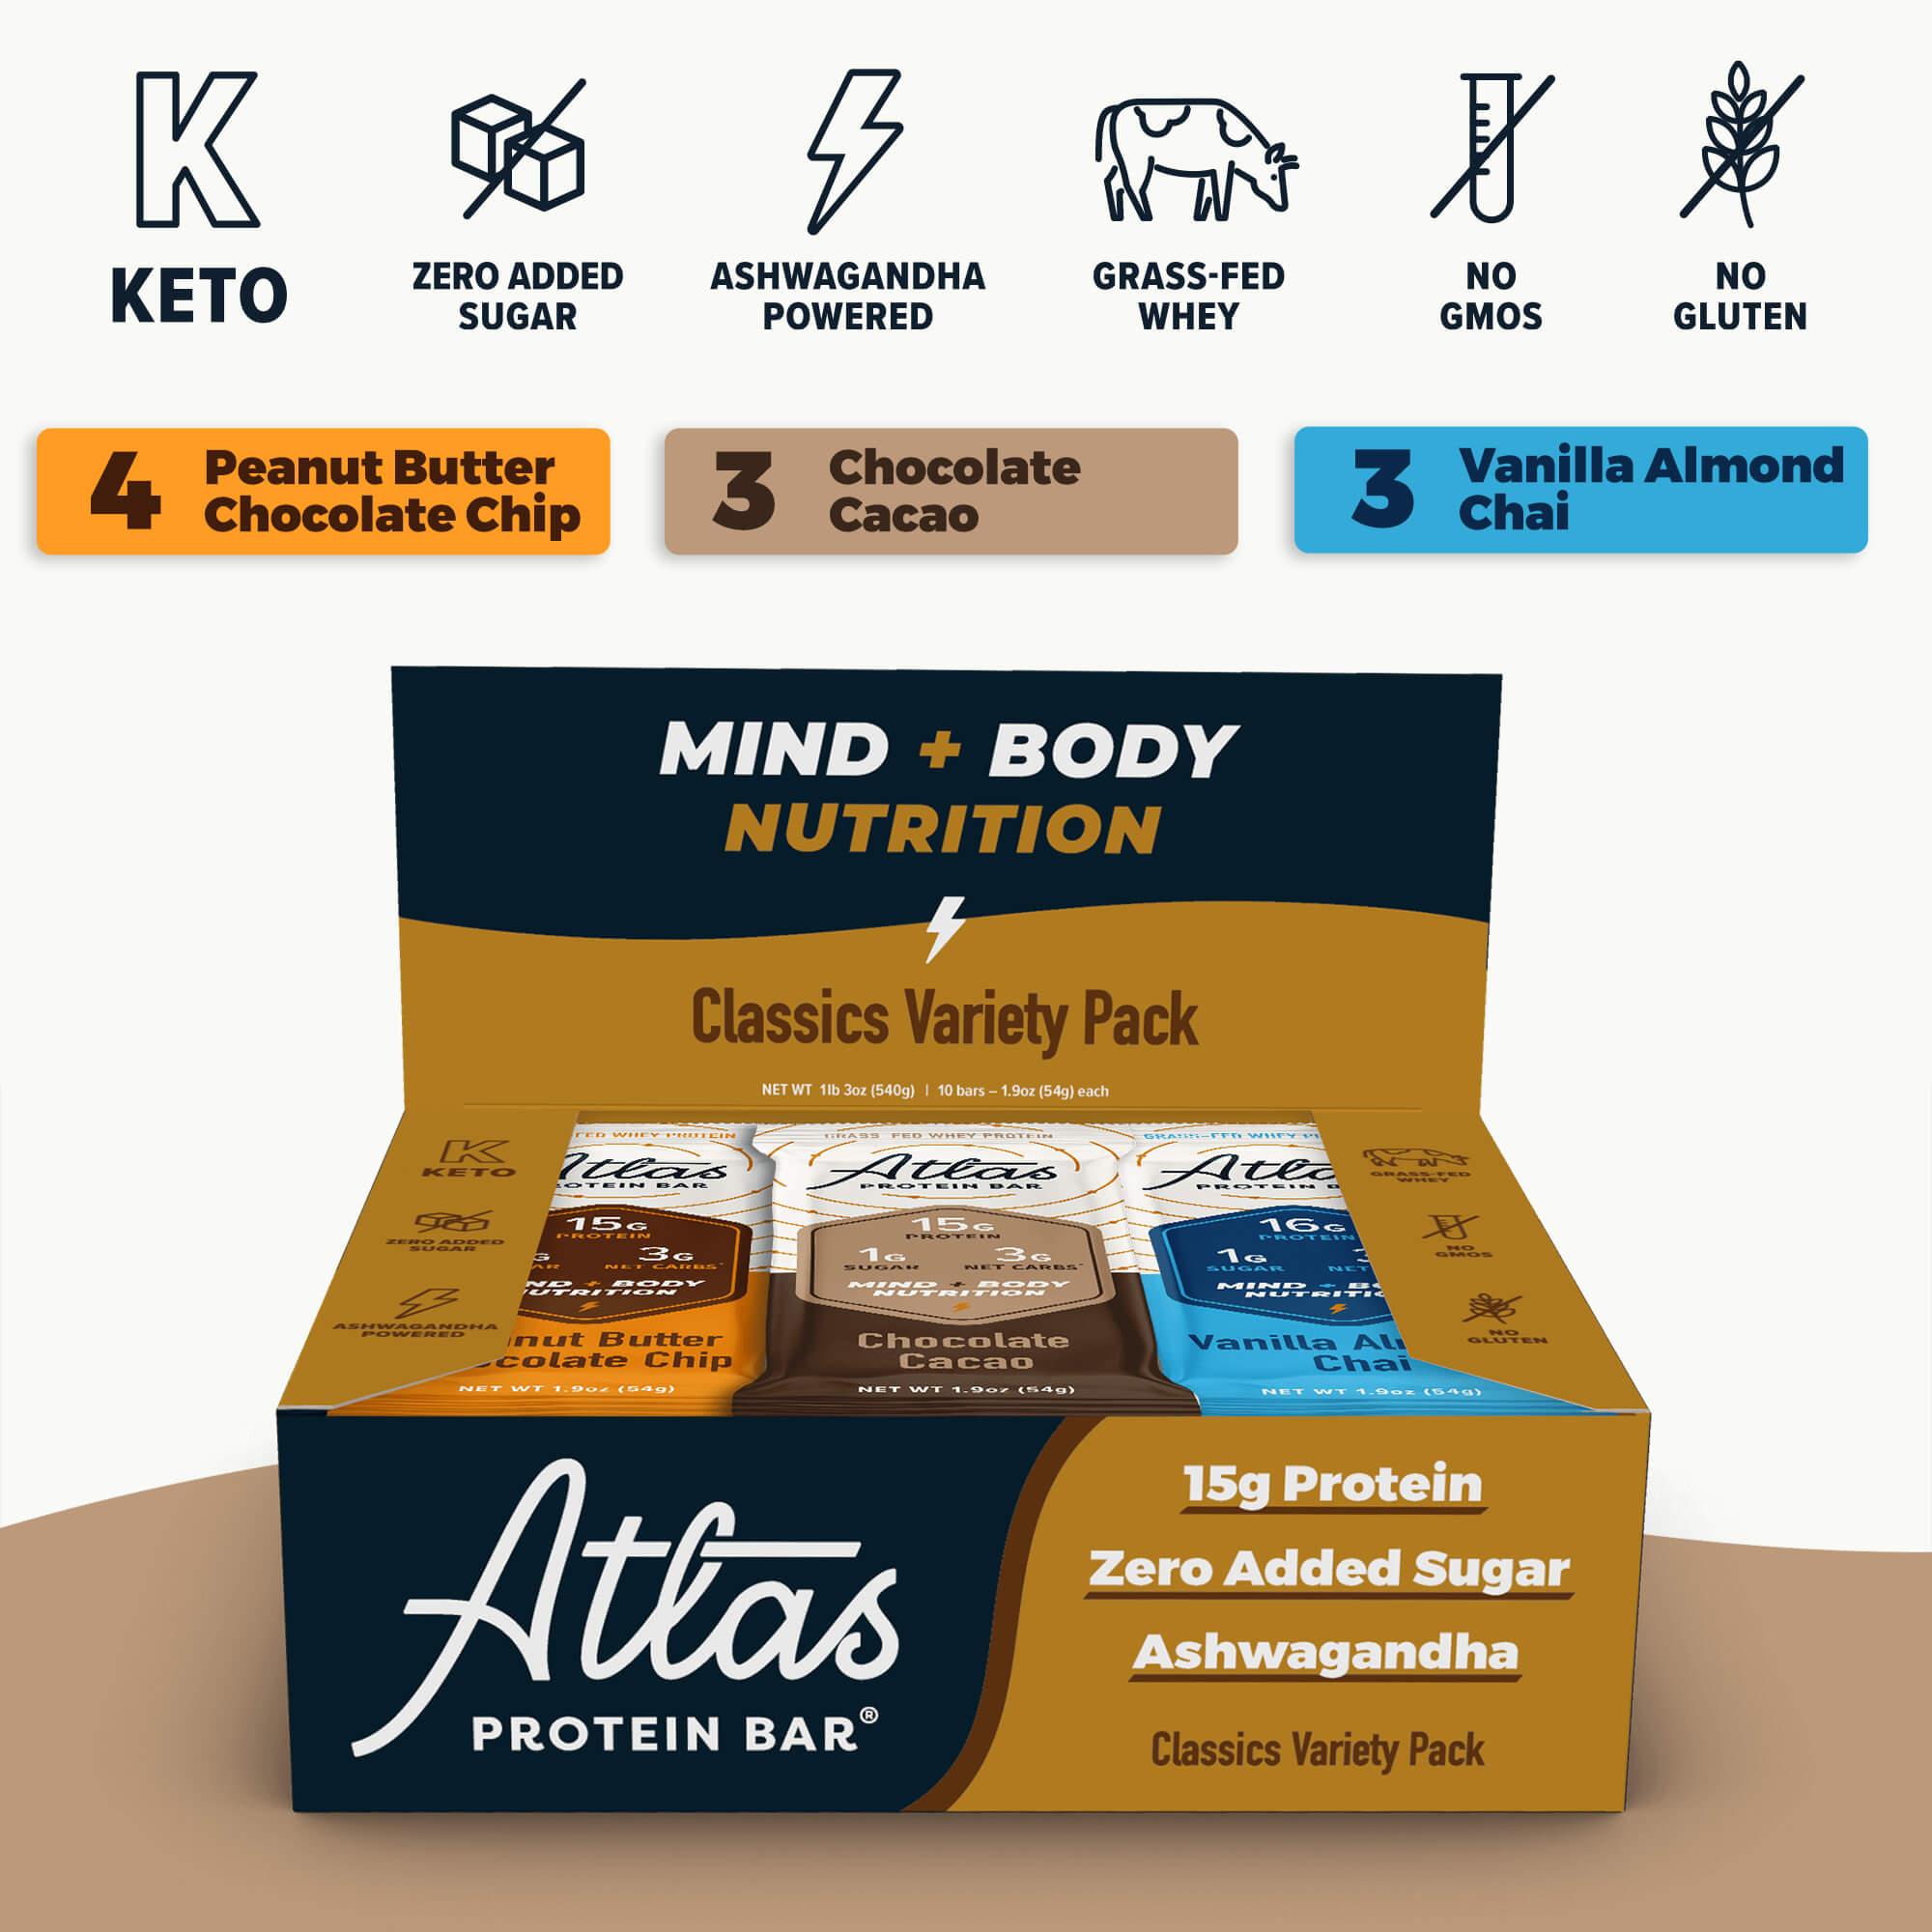 Atlas Bar, Keto Friendly & Grass Fed Whey Protein Bar, Variety Pack, 15g Protein, 9 Bars - image 5 of 9